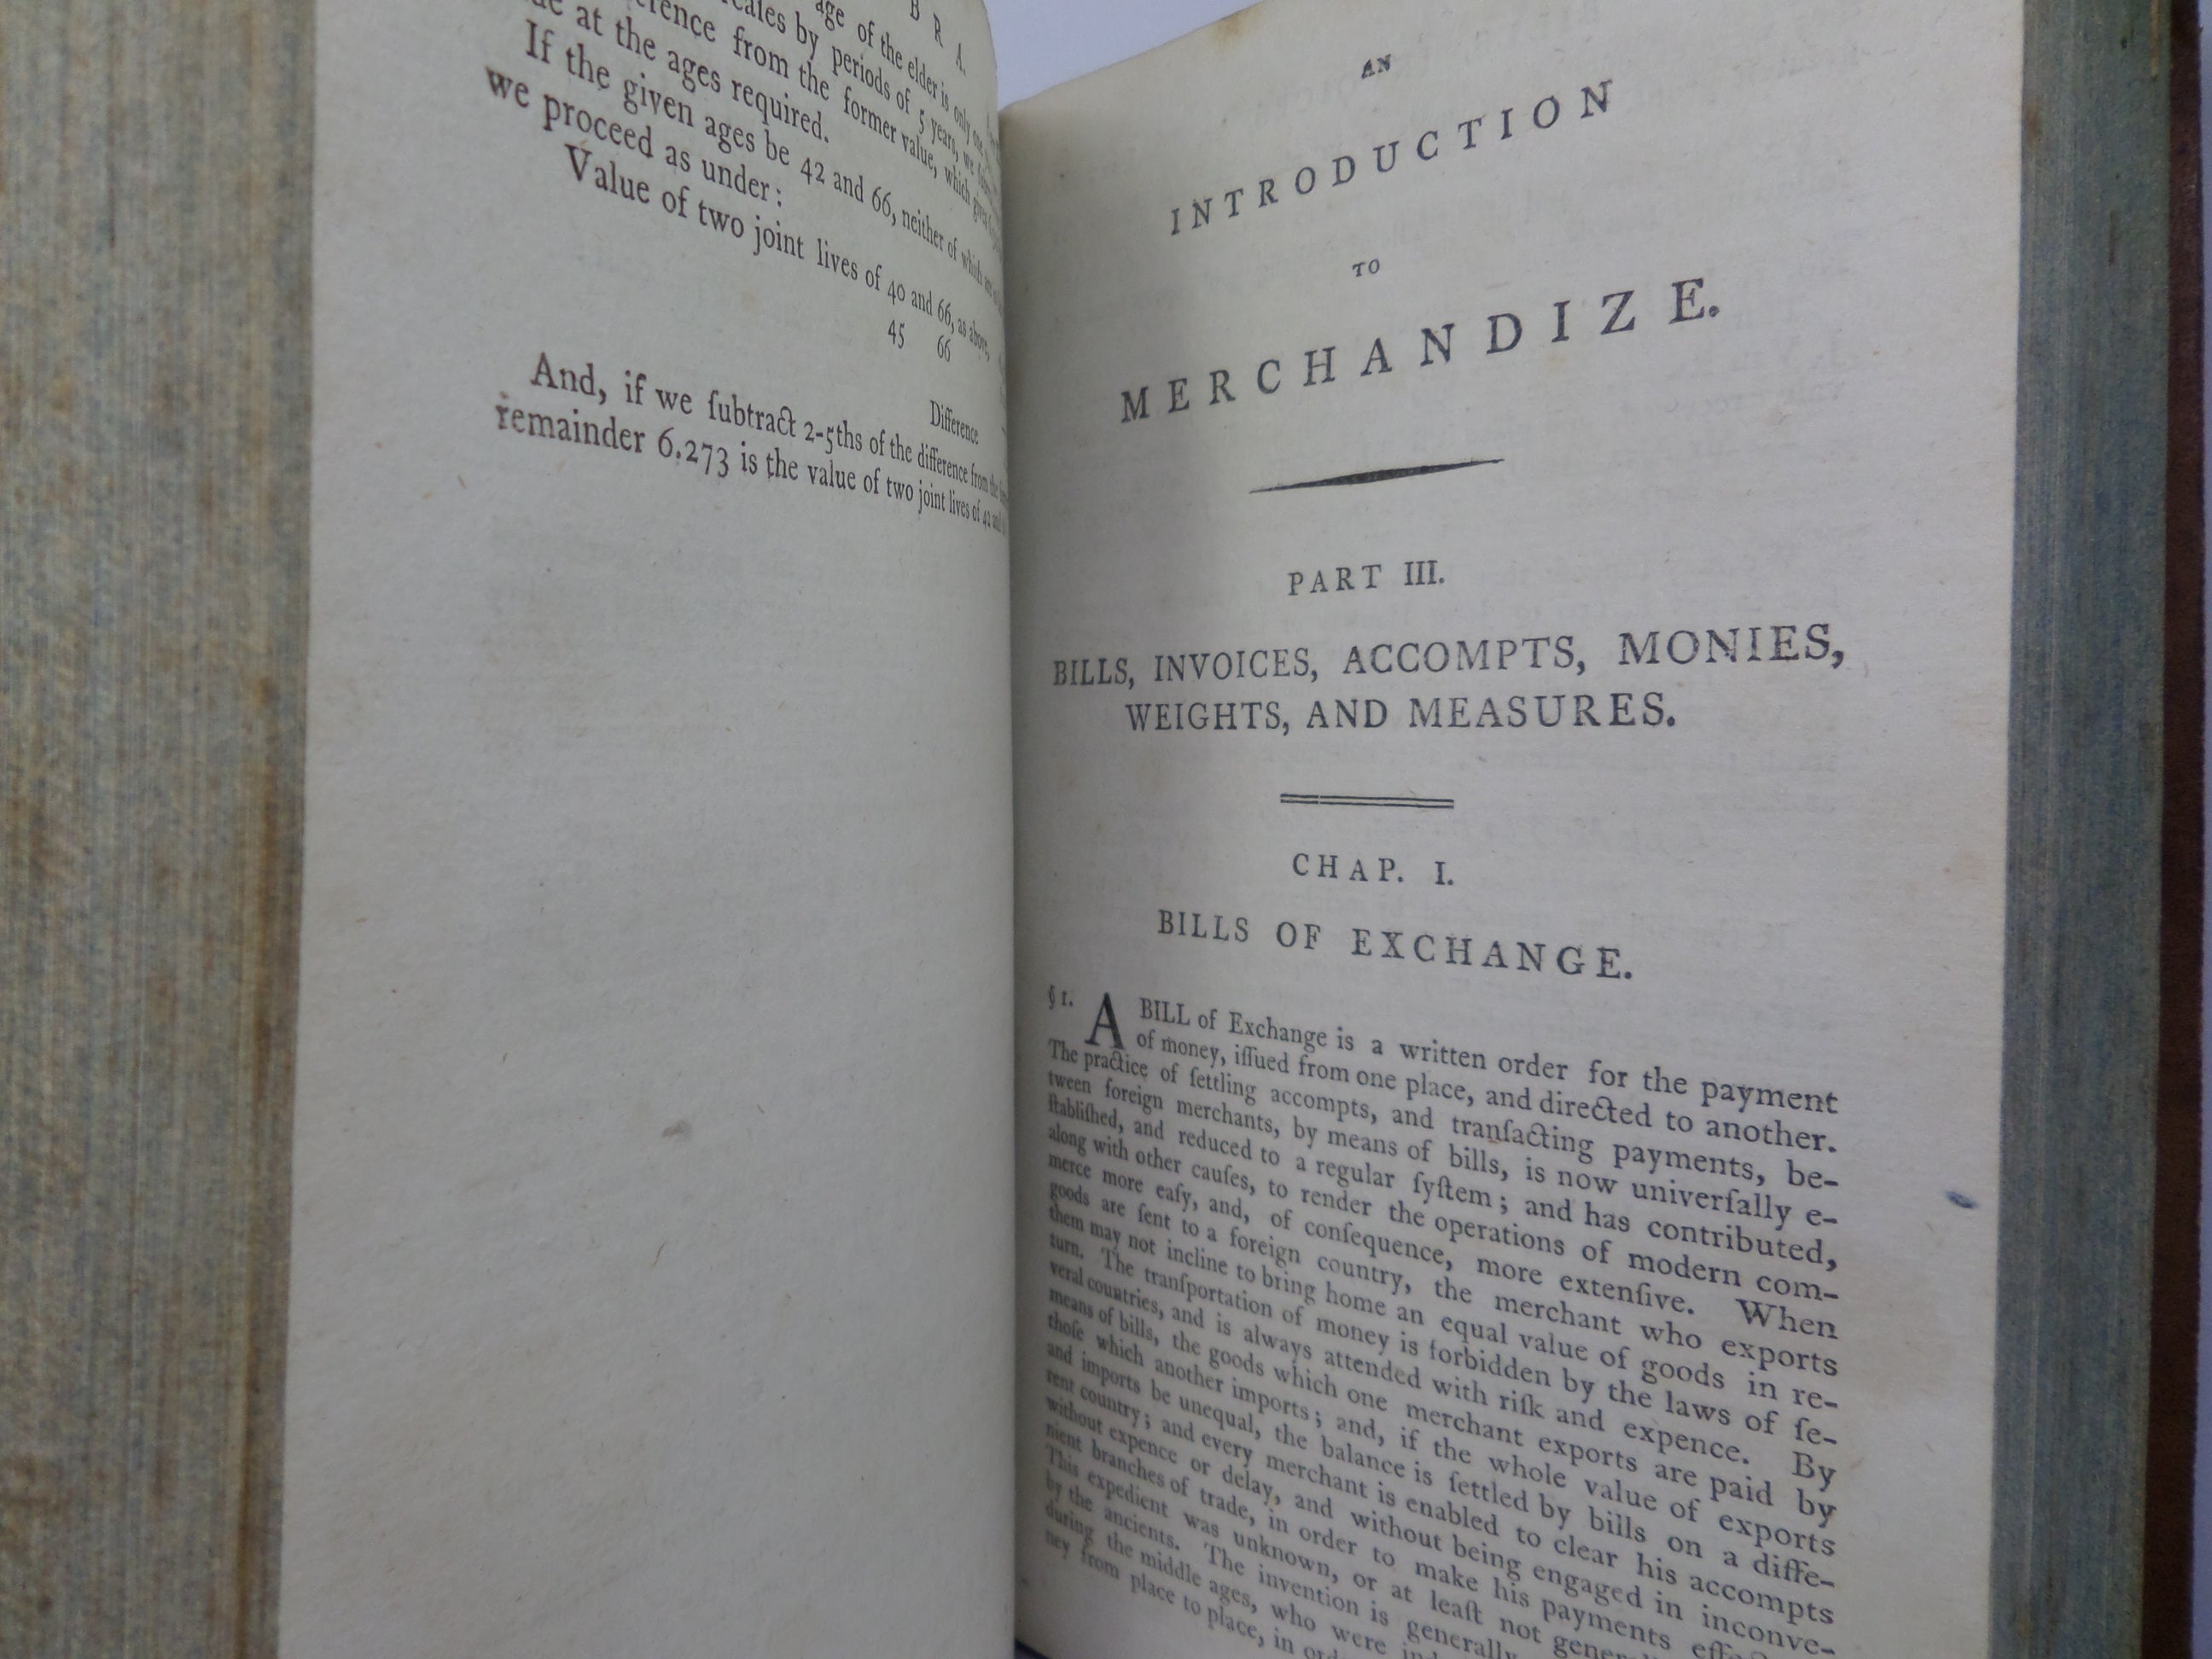 AN INTRODUCTION TO MERCHANDISE BY ROBERT HAMILTON 1802 FIFTH EDITION